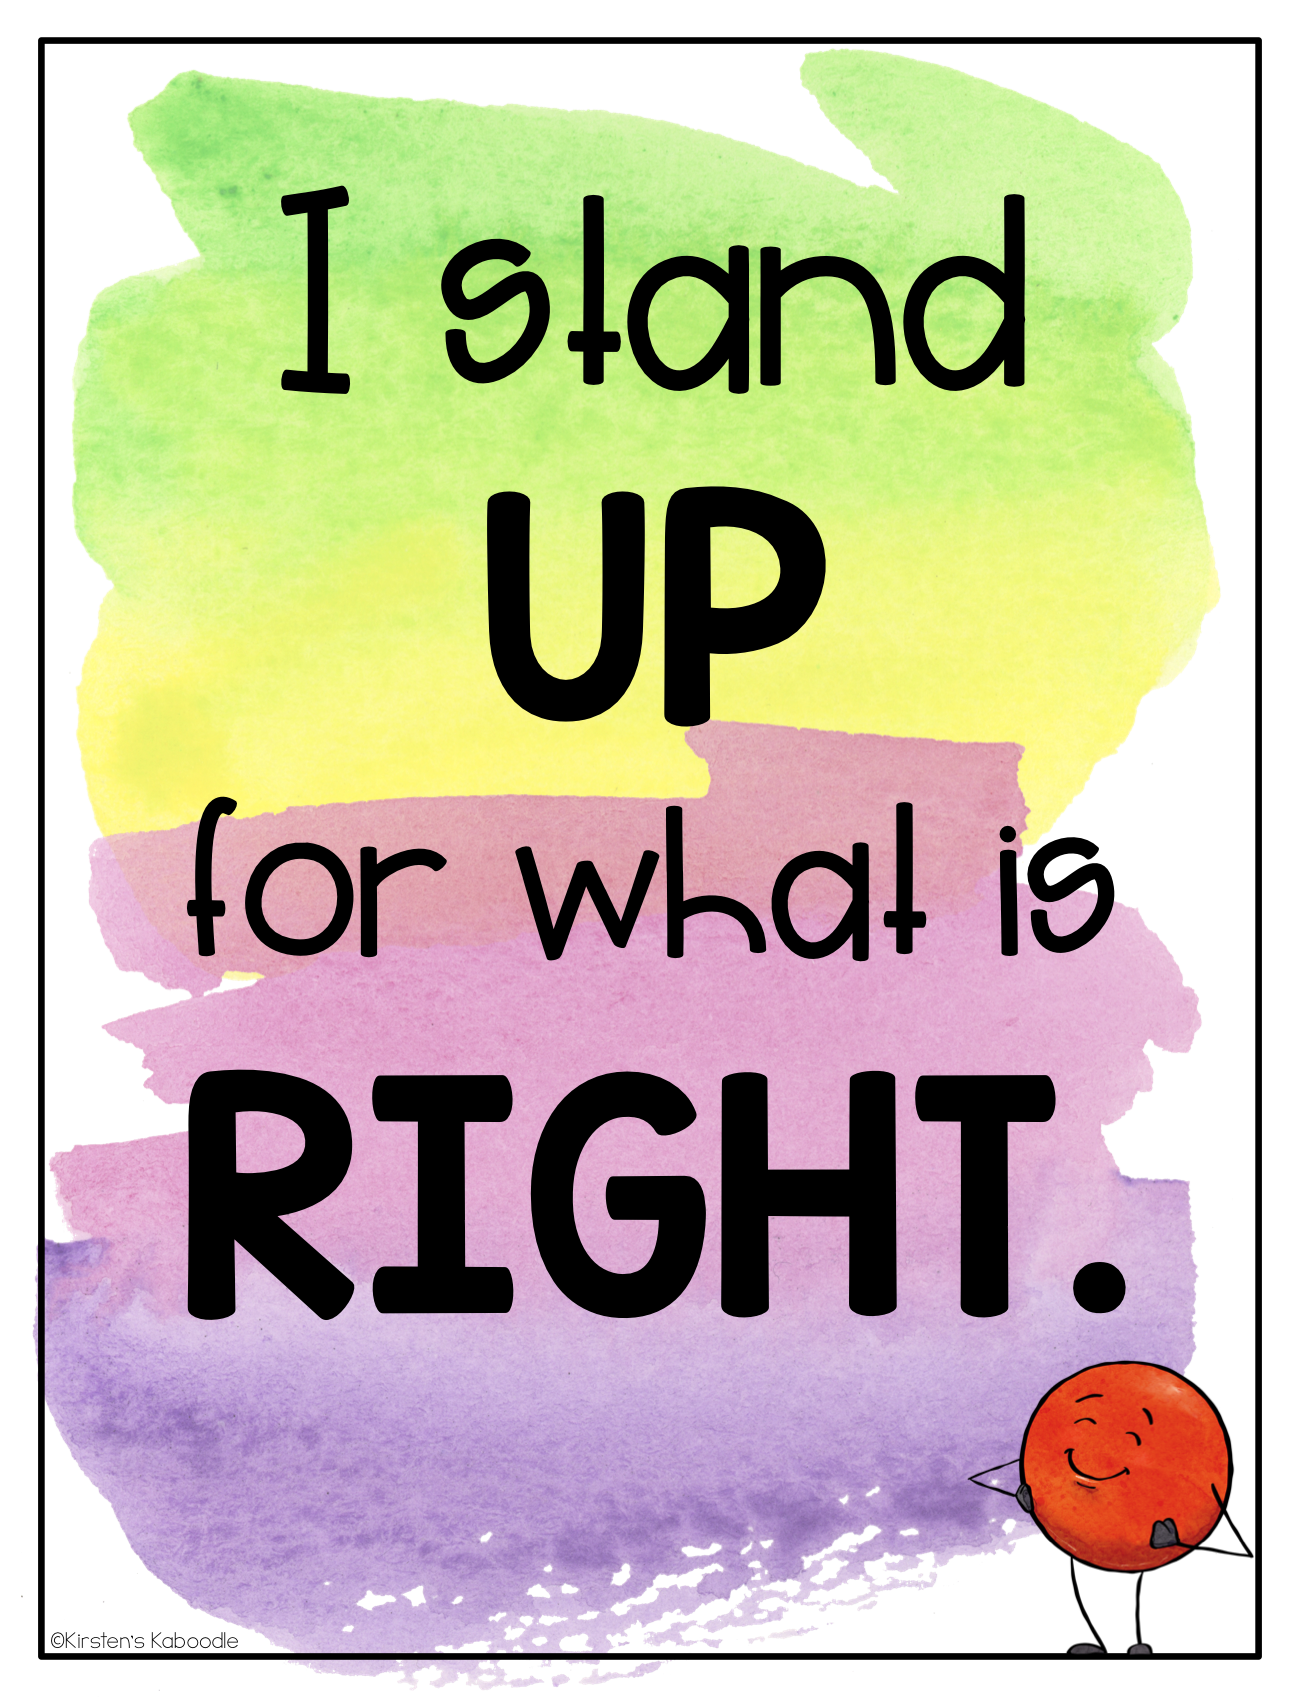 Positive Affirmations Posters and Cards: Full Color Watercolor Version